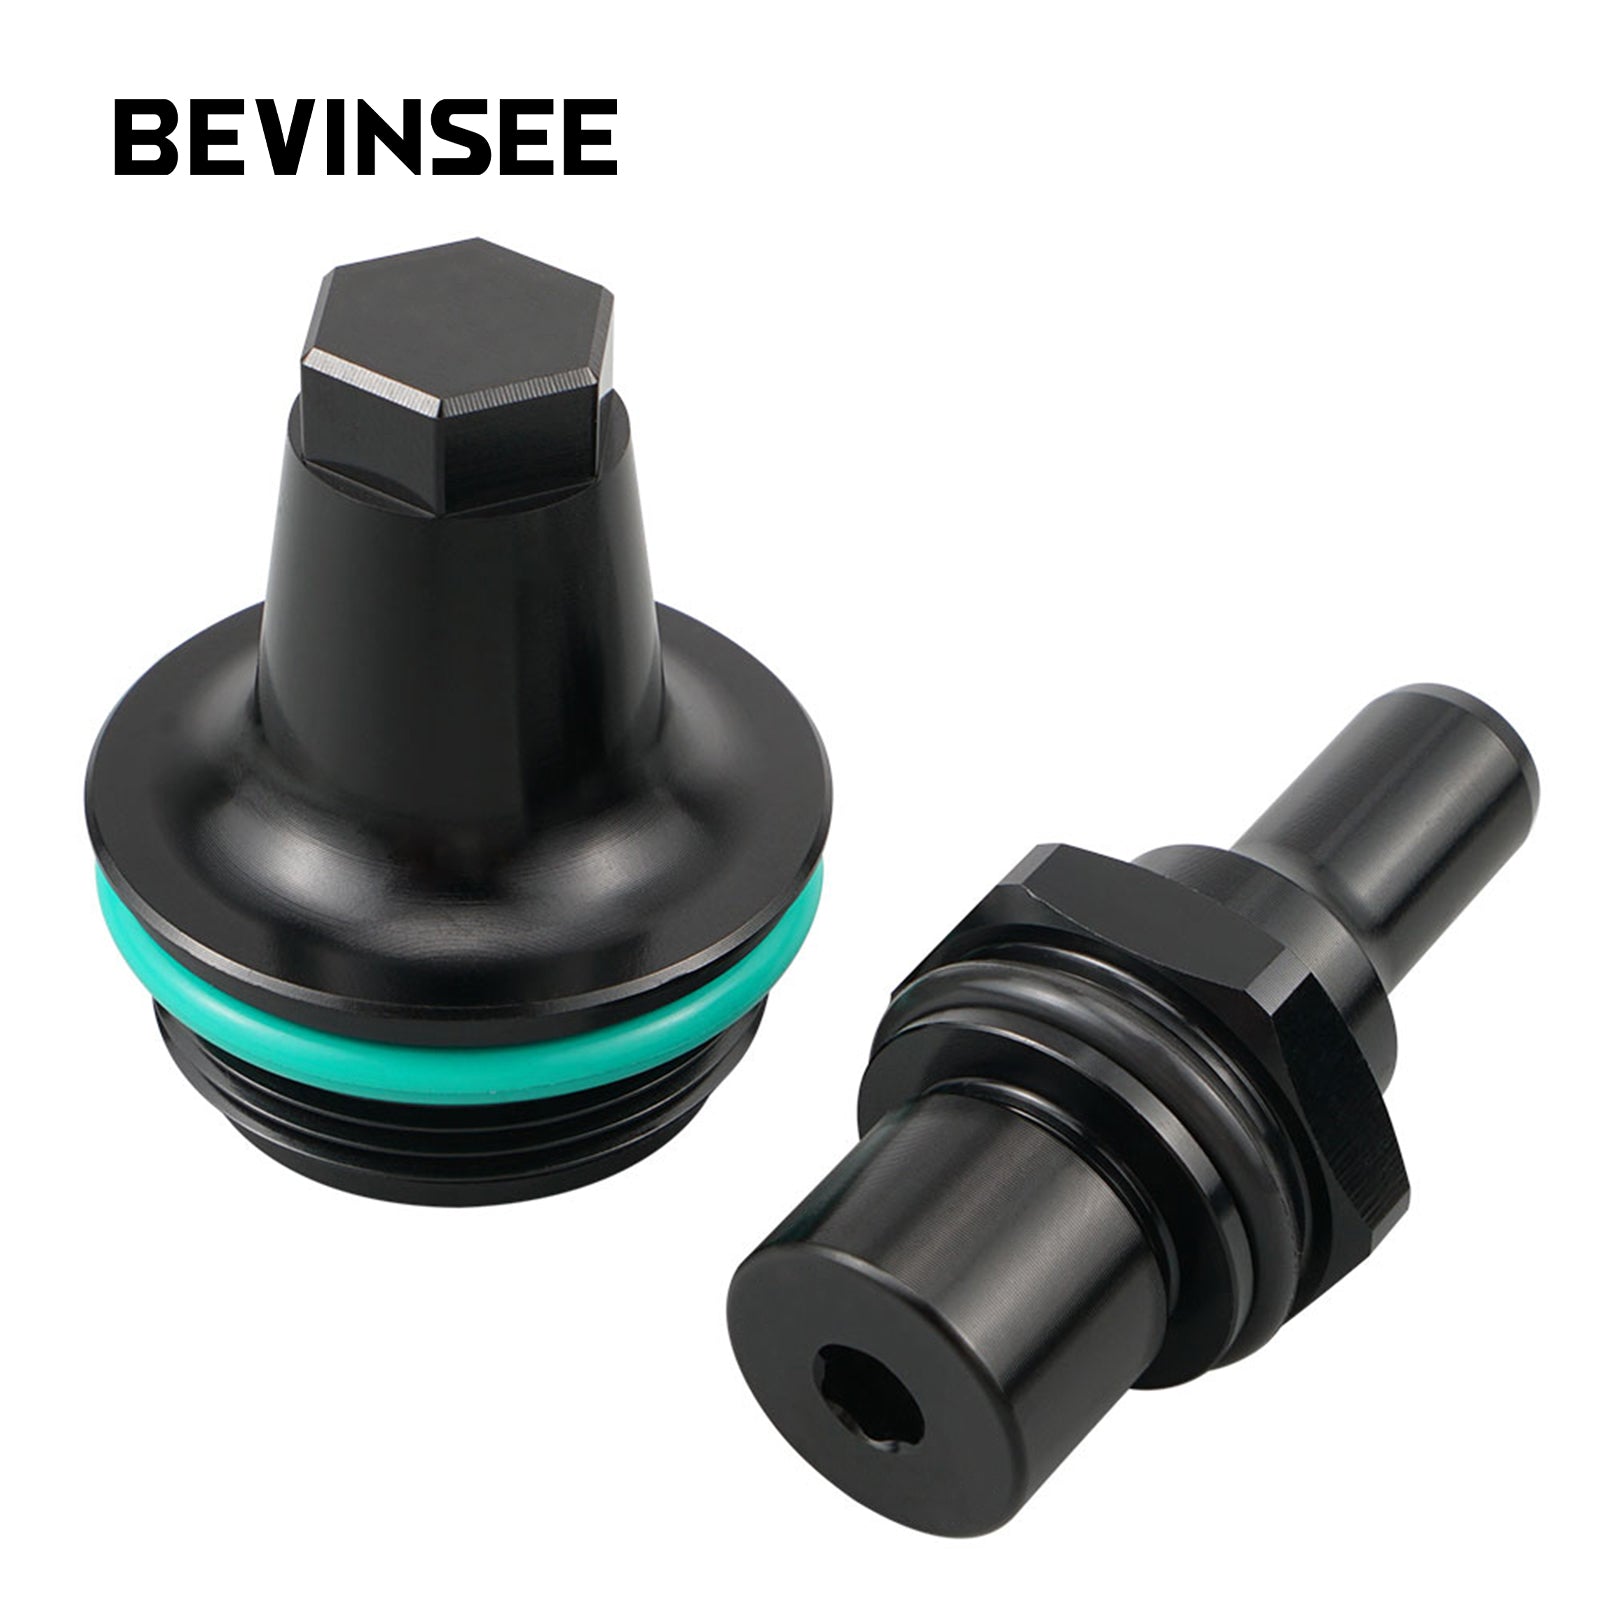 BEVINSEE N54 Aluminum PCV Valve Upgrade Black For BMW X6 Z4 Twin Turbo Engines